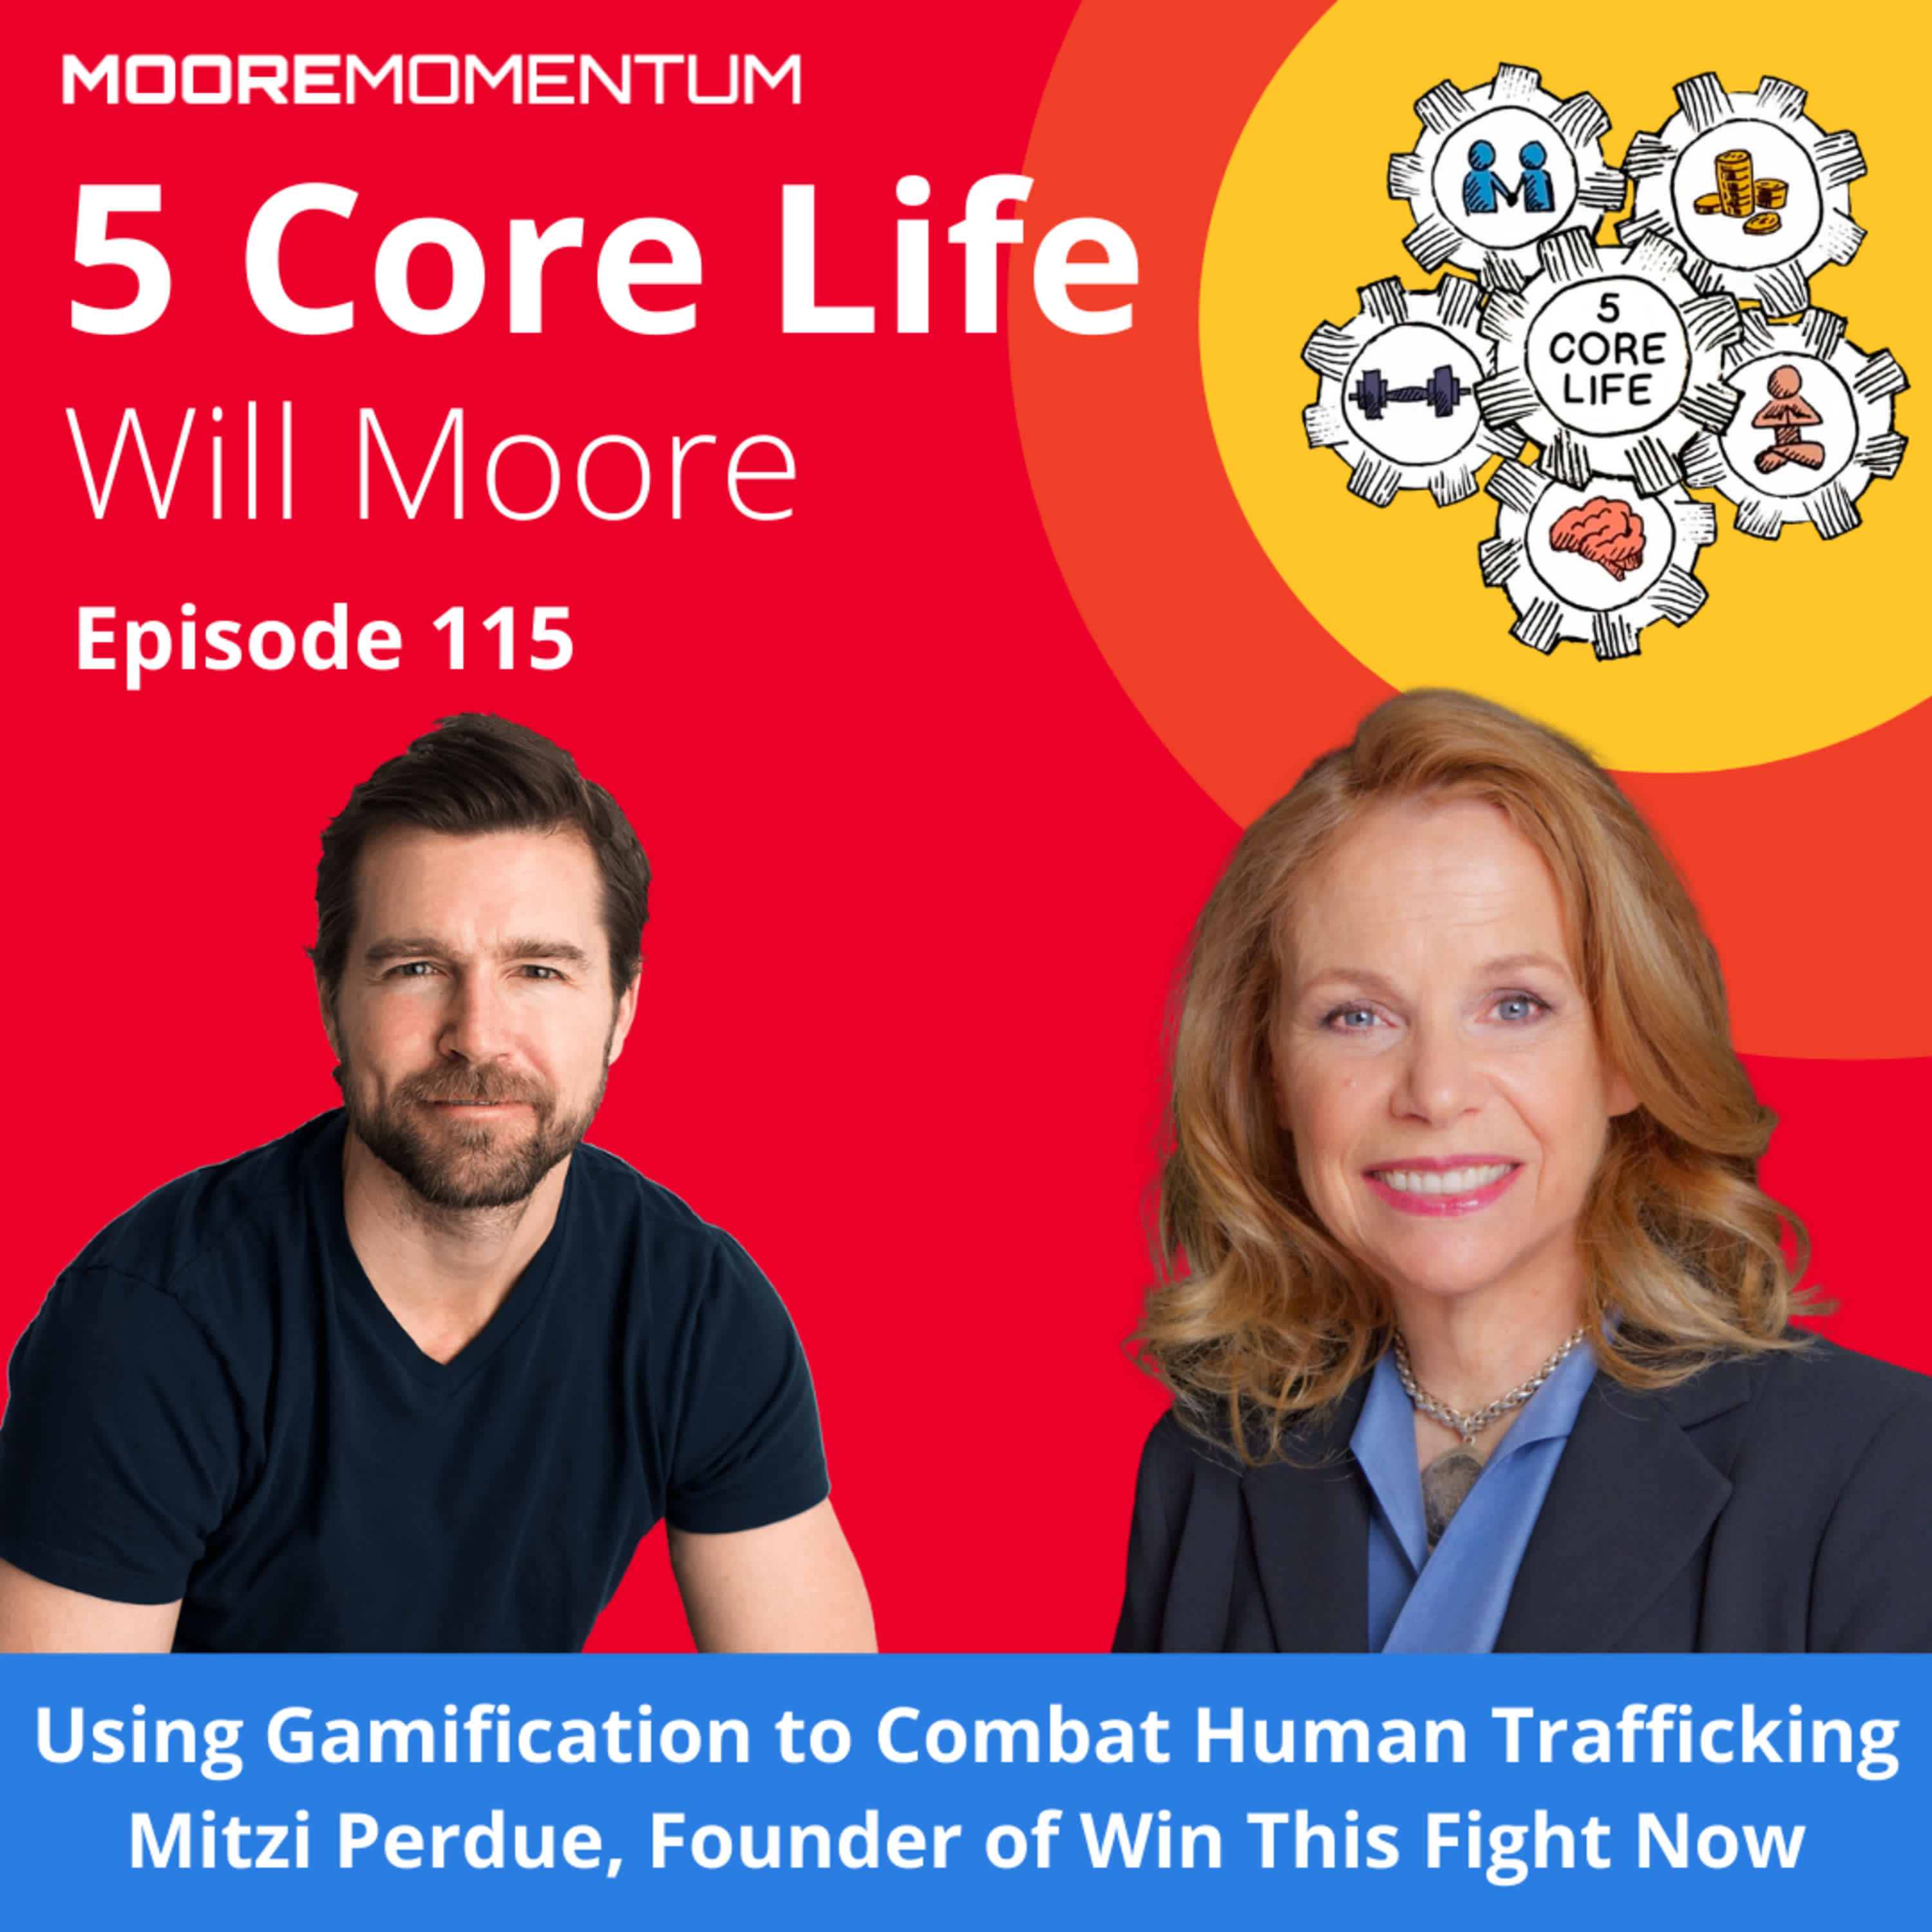 Using Gamification to Combat Human Trafficking | Mitzi Purdue, Founder of Win This Fight for Good